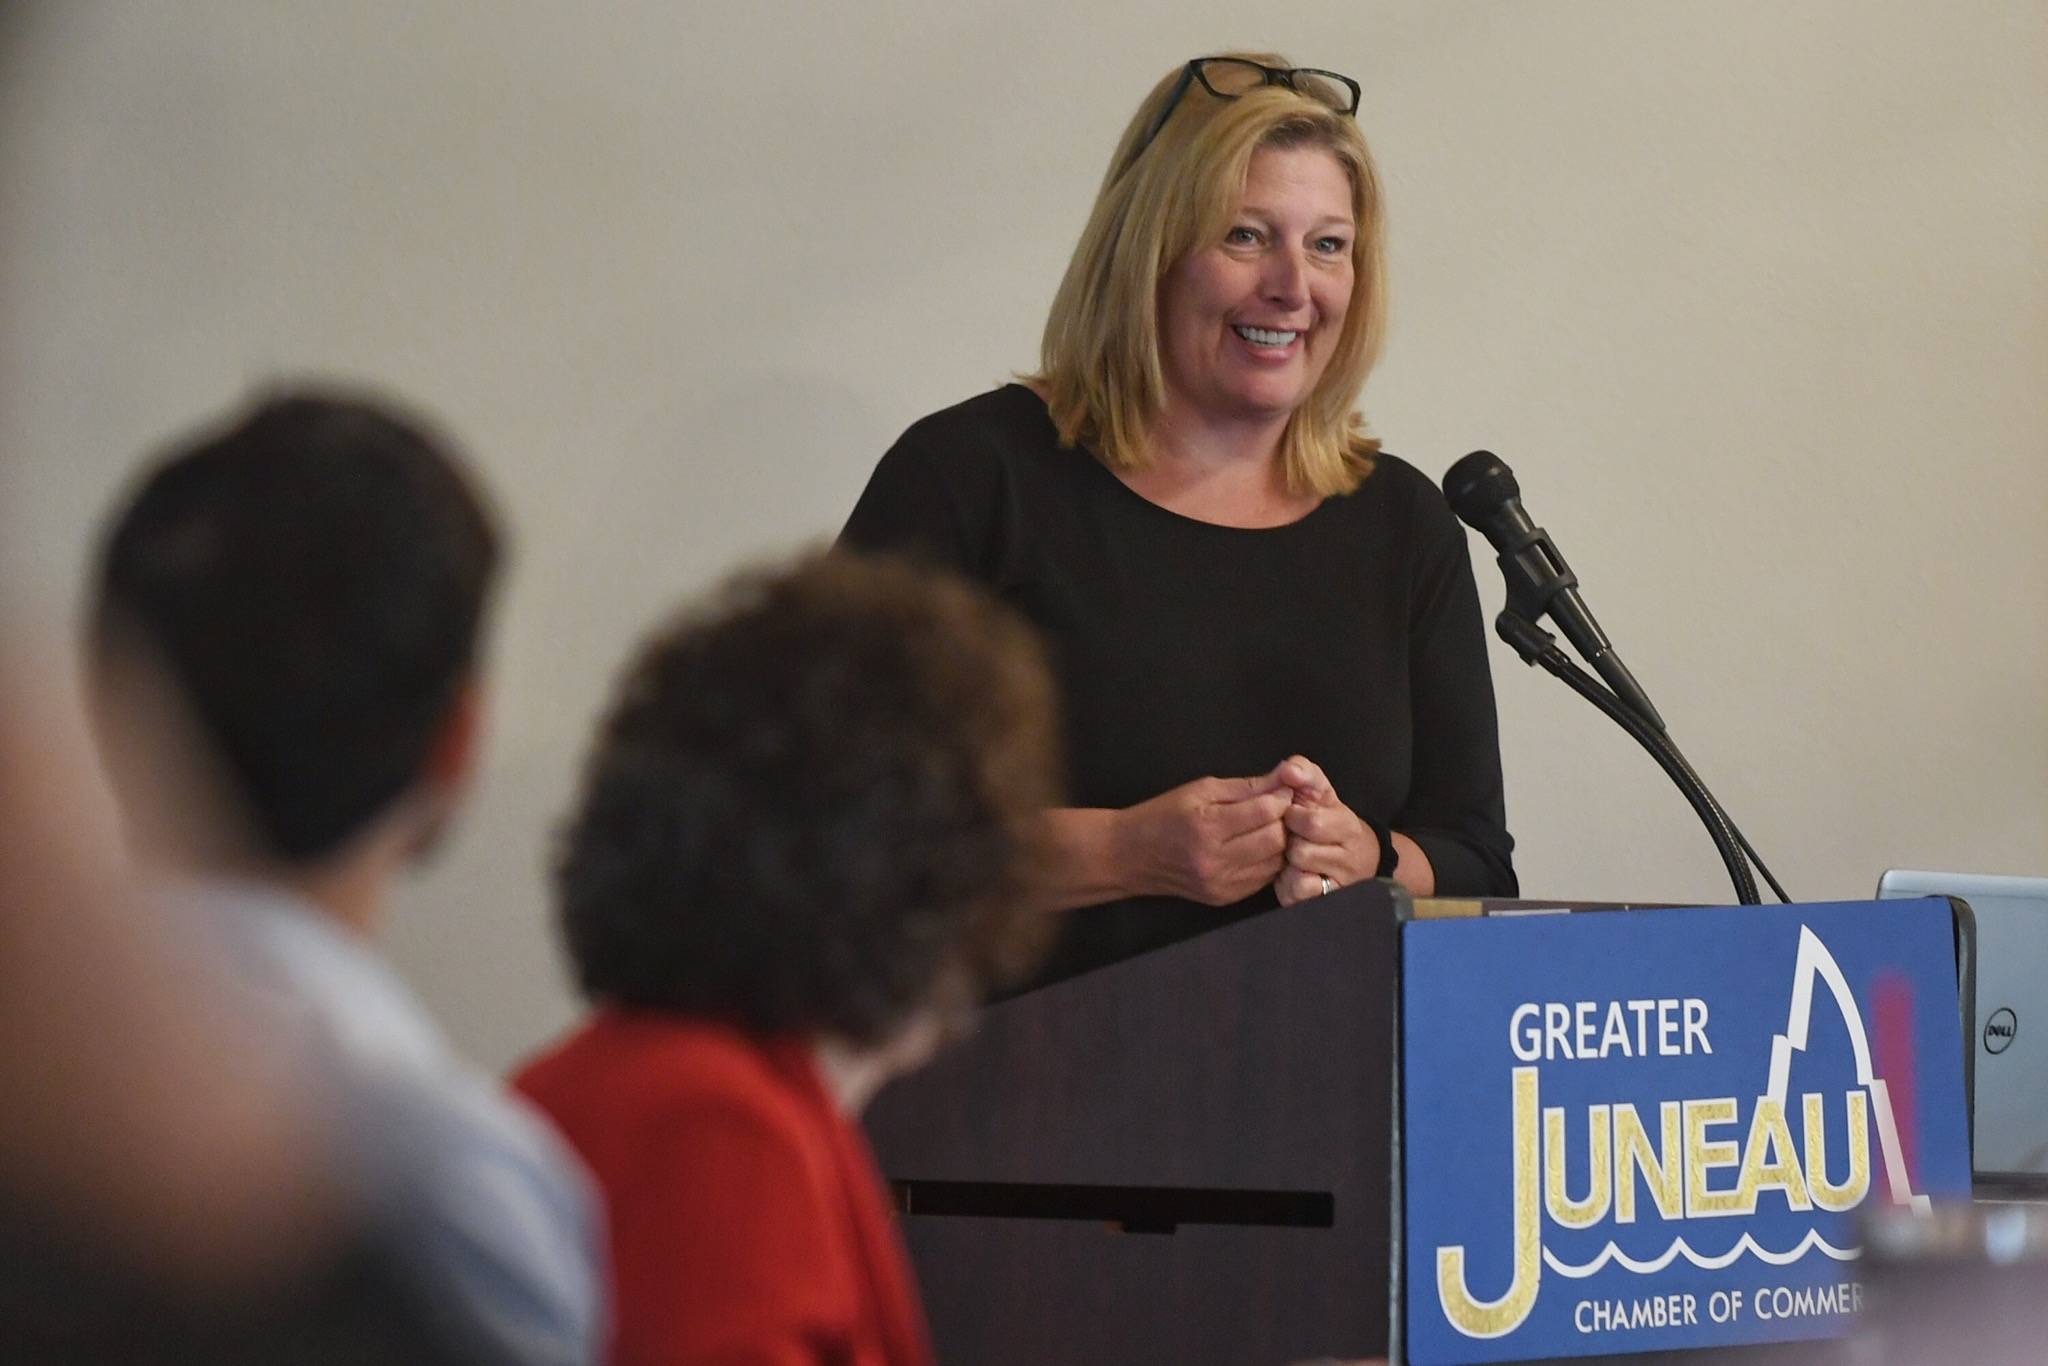 Mary Anne Carter, chairman of the National Endowment for the Arts, speaks at the Greater Juneau Chamber of Commerce’s weekly luncheon at the Moose Lodge, Aug. 15, 2019. (Michael Penn | Juneau Empire)